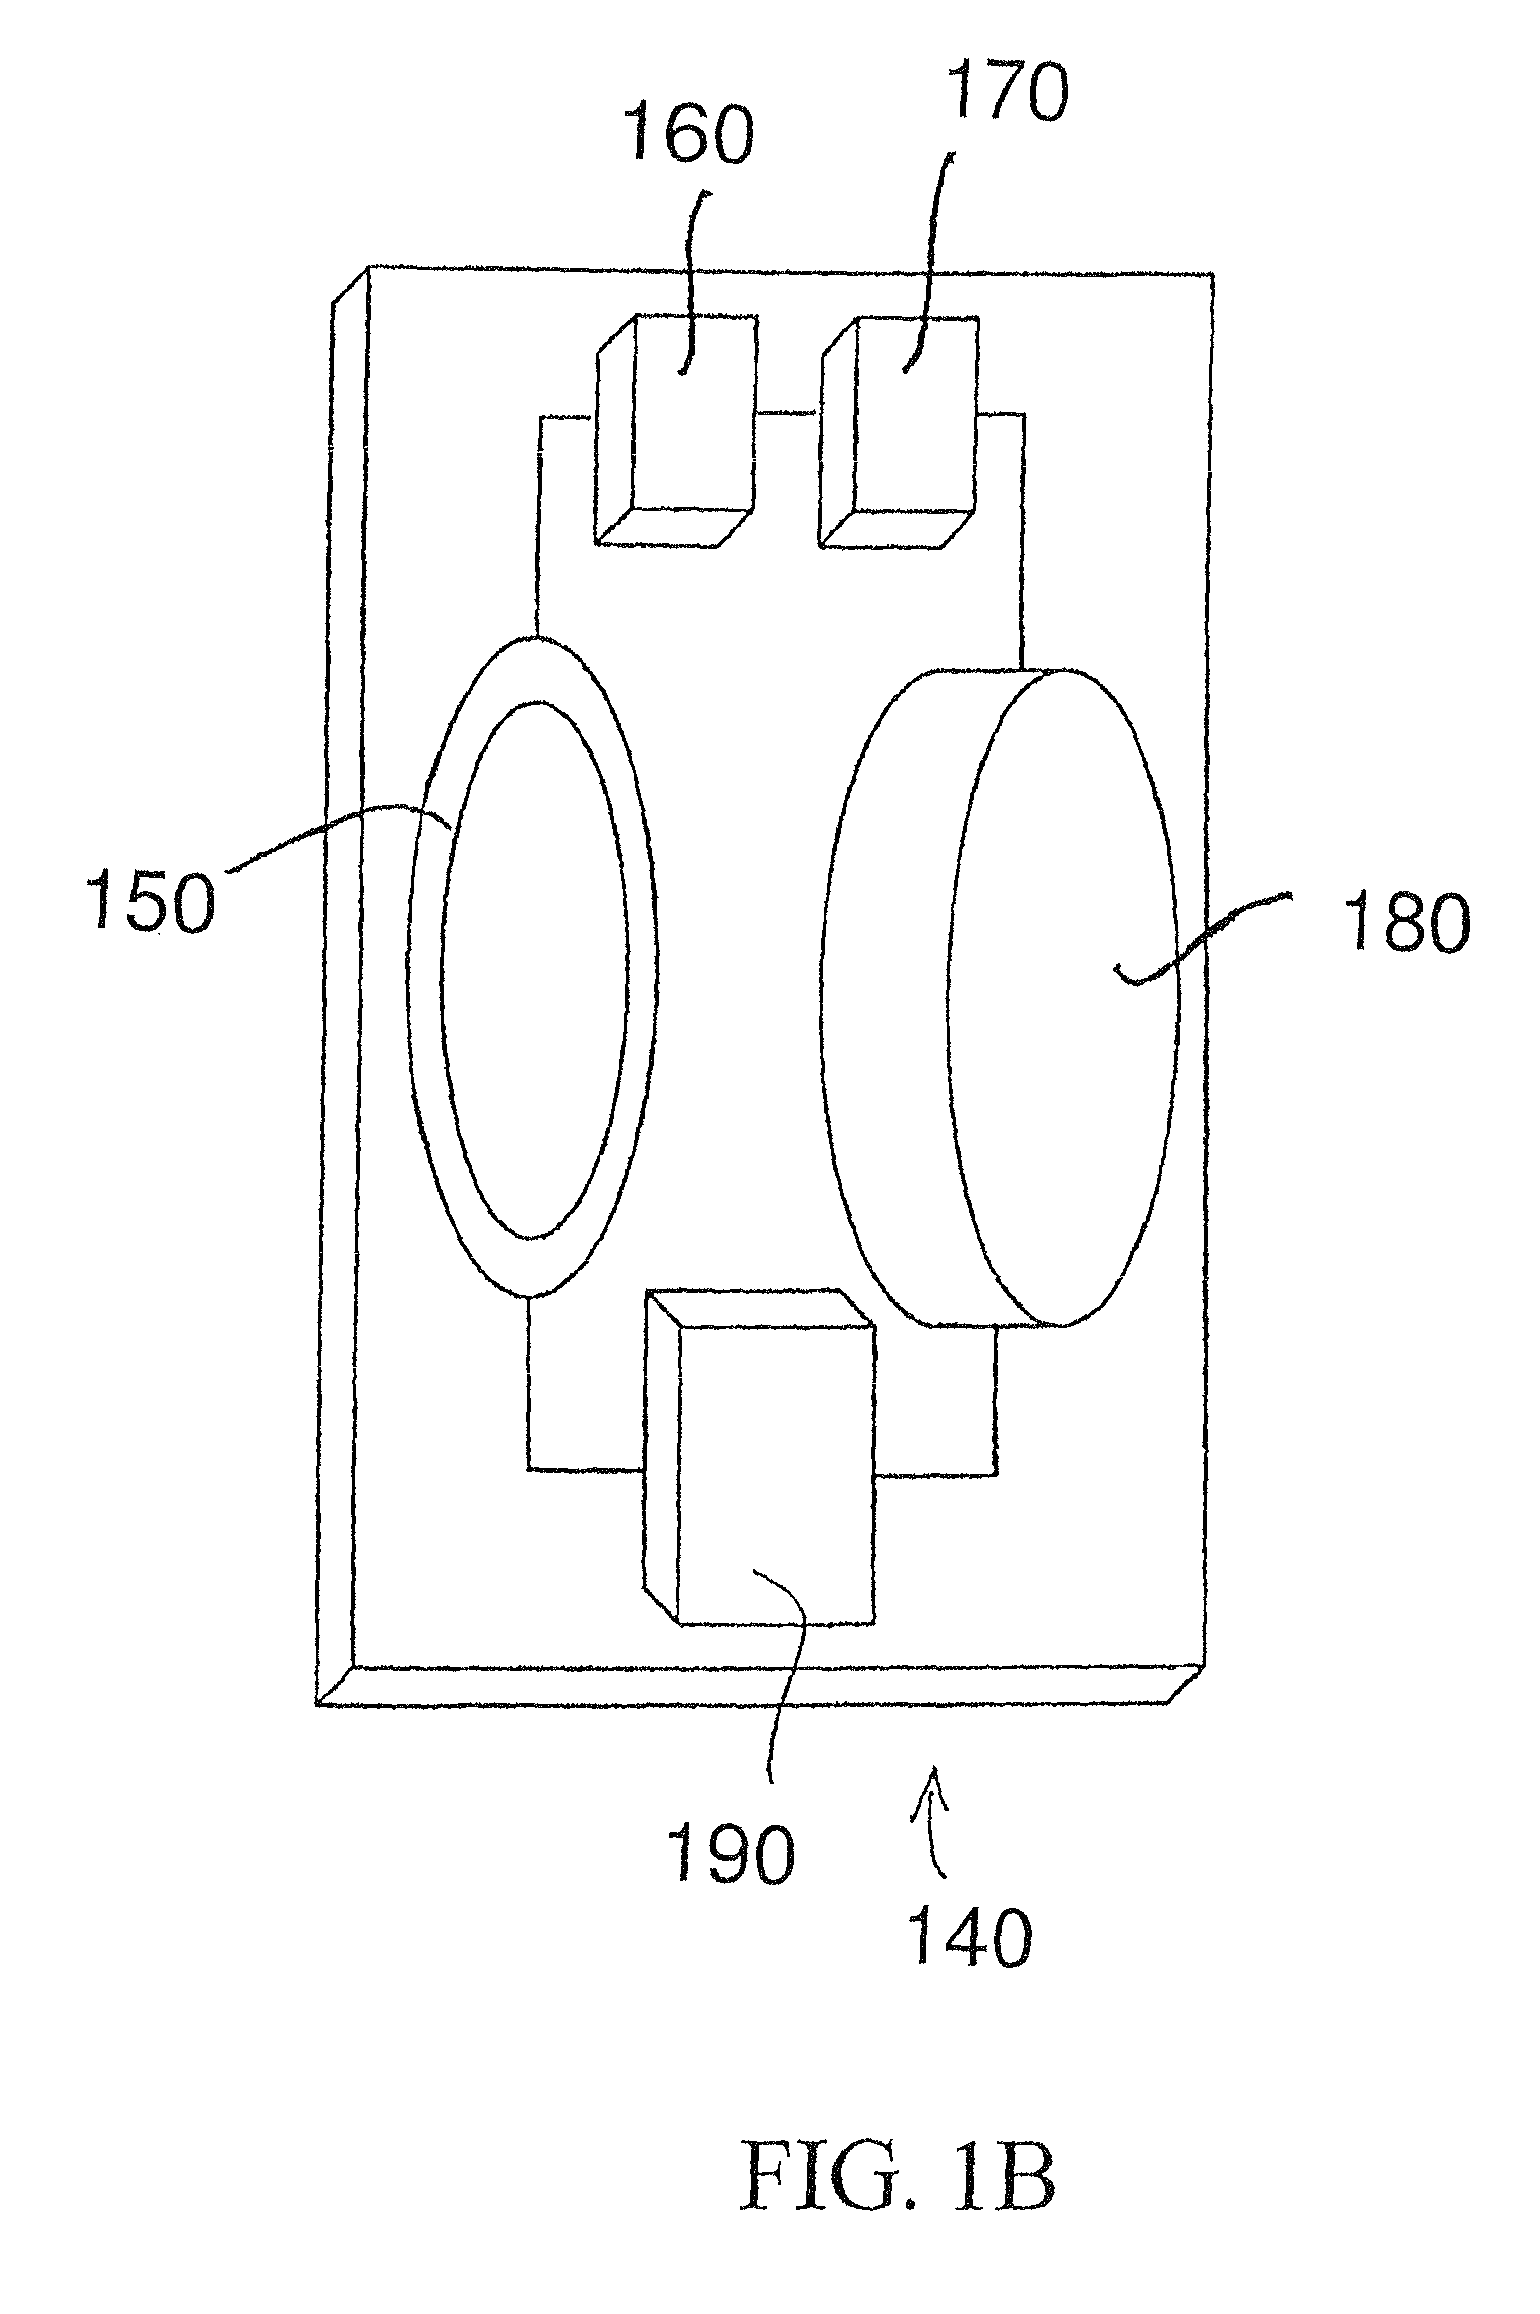 Bio-implantable ultrasound energy capture and storage assembly including transmitter and receiver cooling